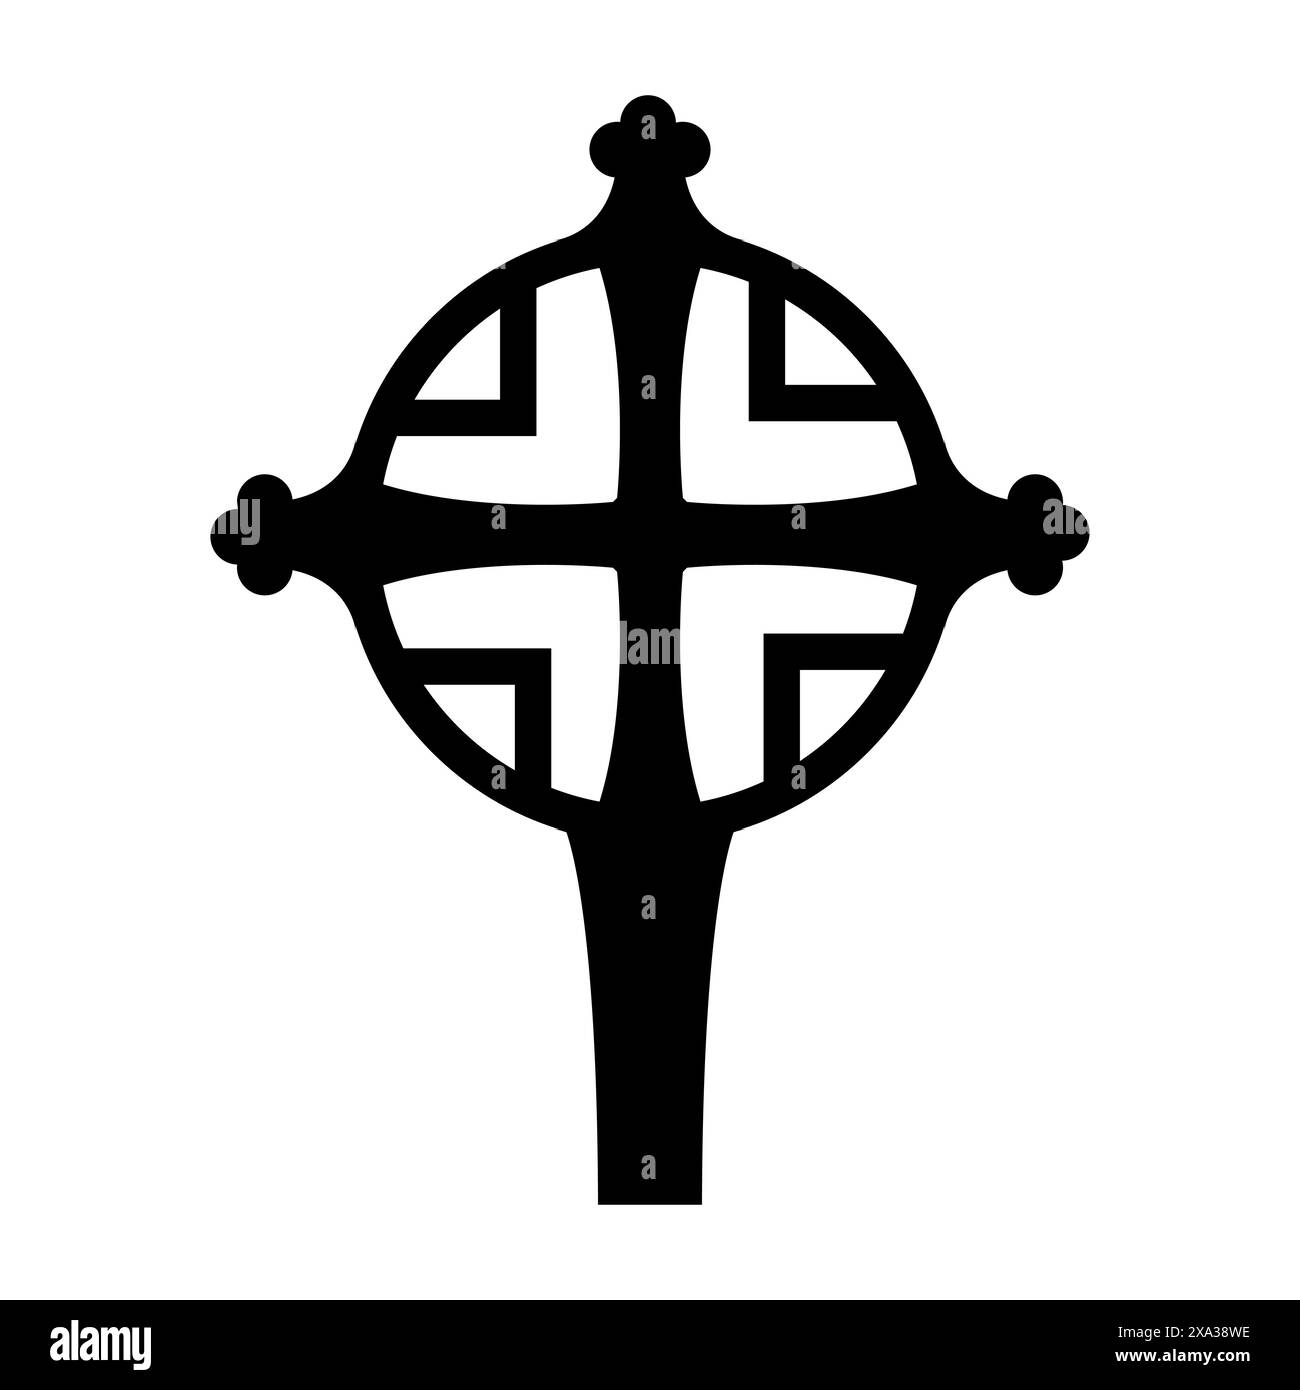 Christian hand cross with circle, symbol, unique form Stock Vector